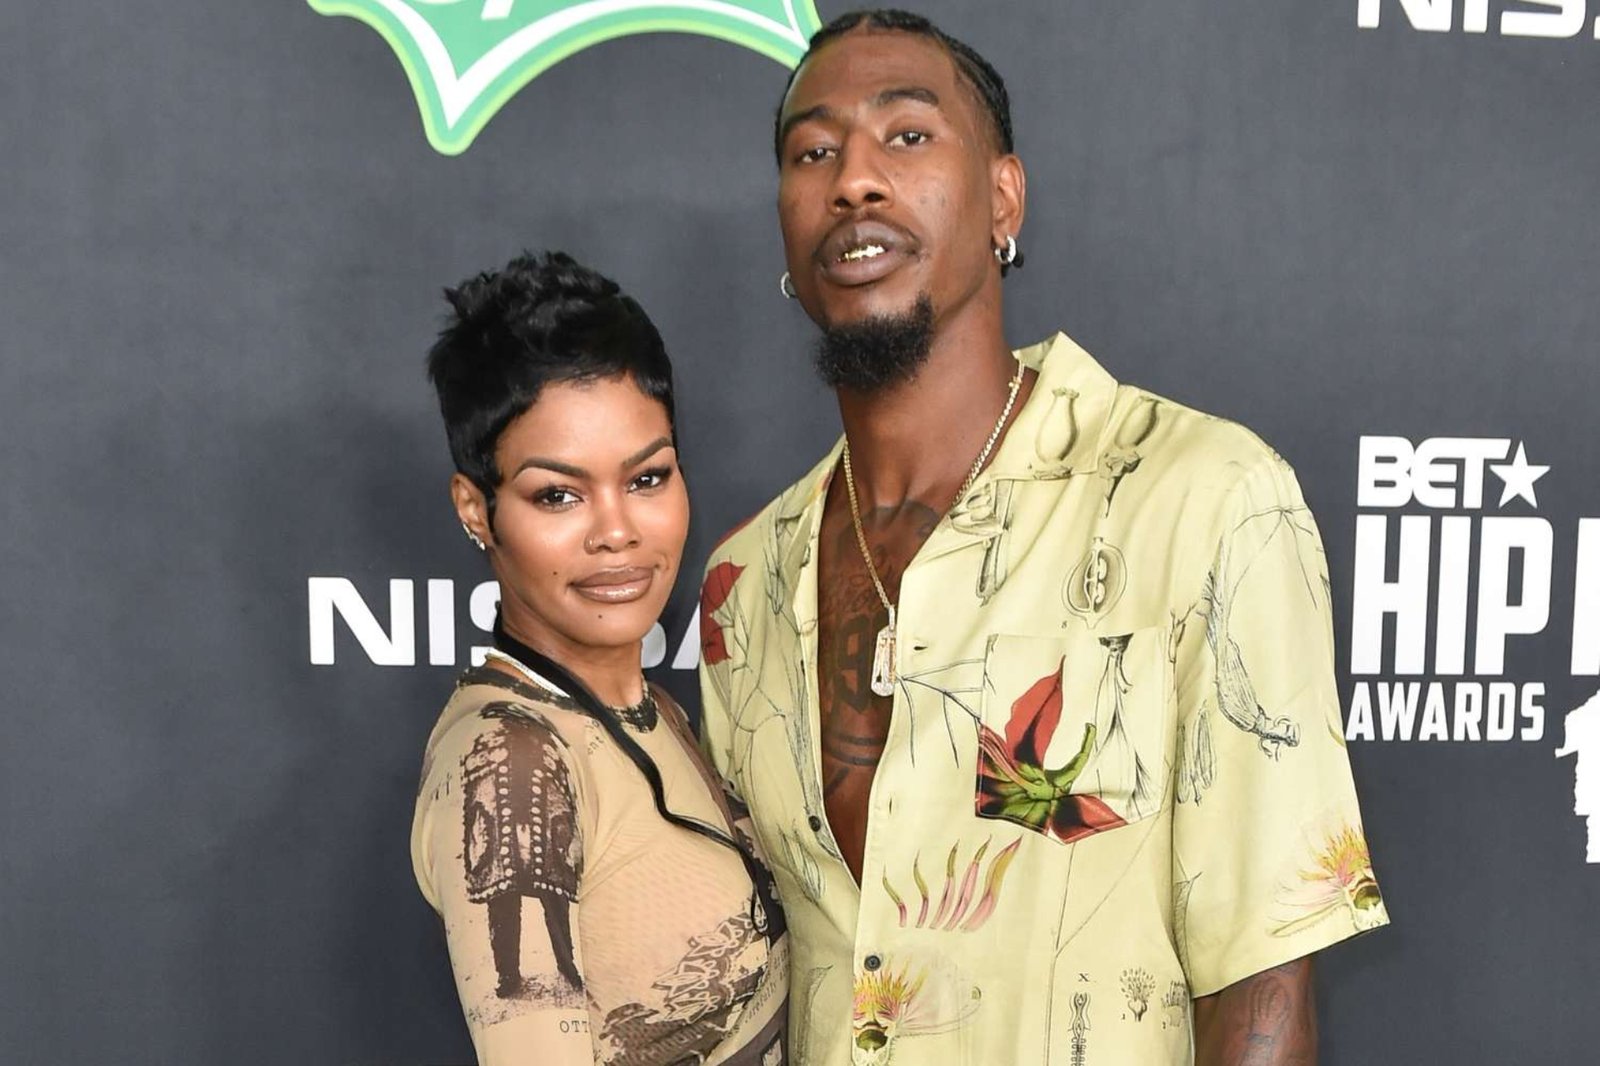 Teyana Taylor and Iman Shumpert’s Divorce Battle Intensifies with Allegations of Irresponsibility